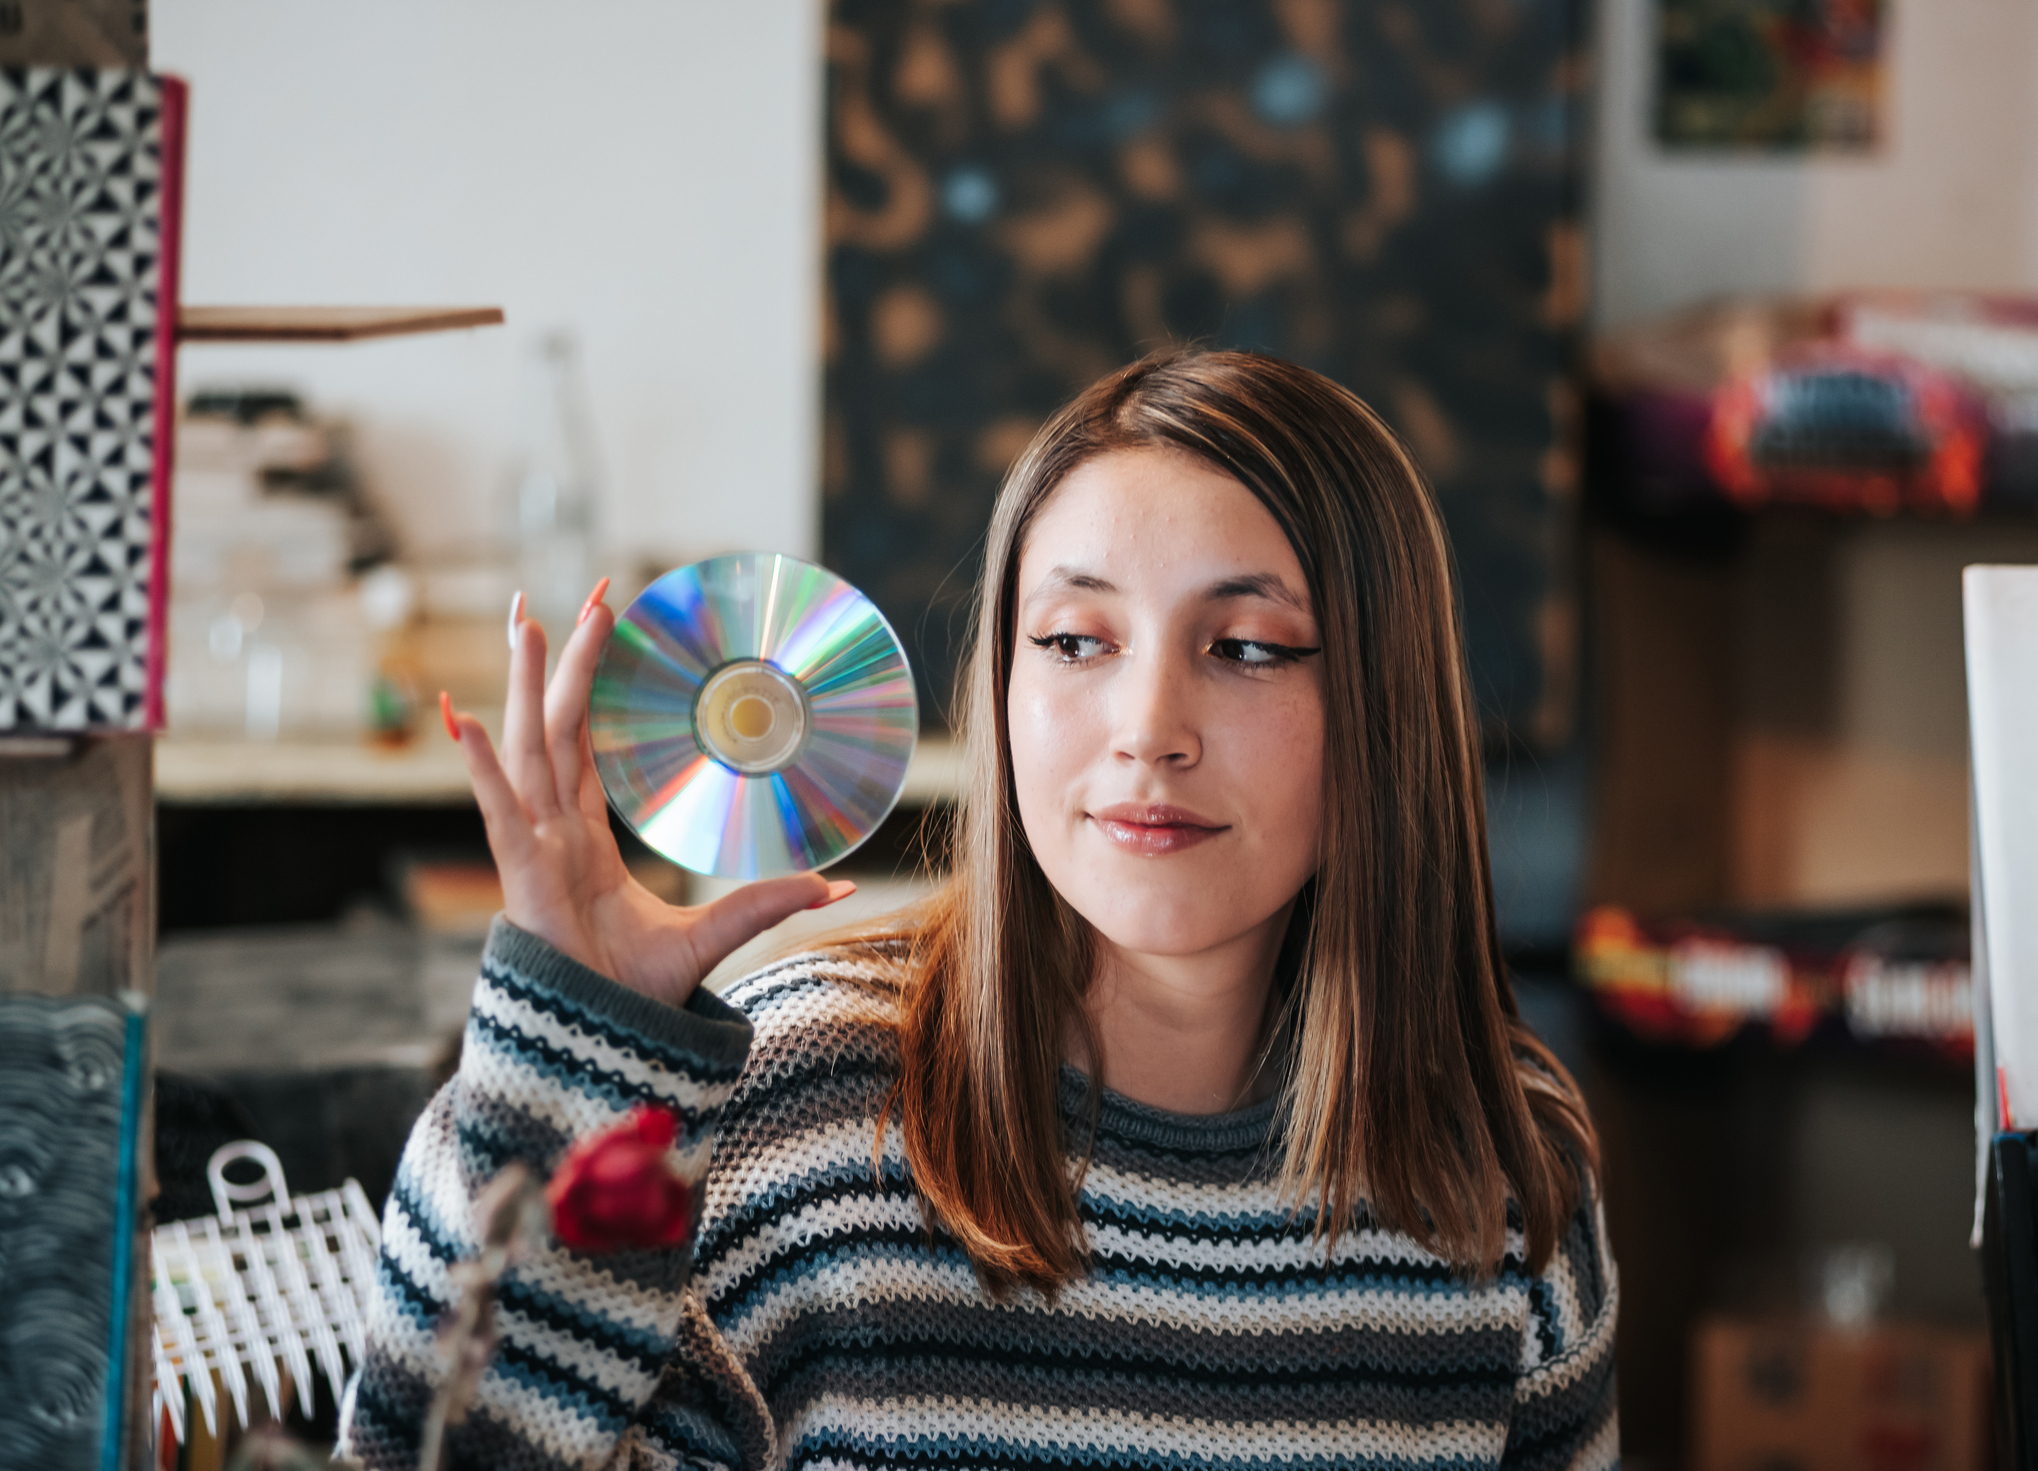 A woman in a striped sweater holds up a CD while looking at it, with a thoughtful expression